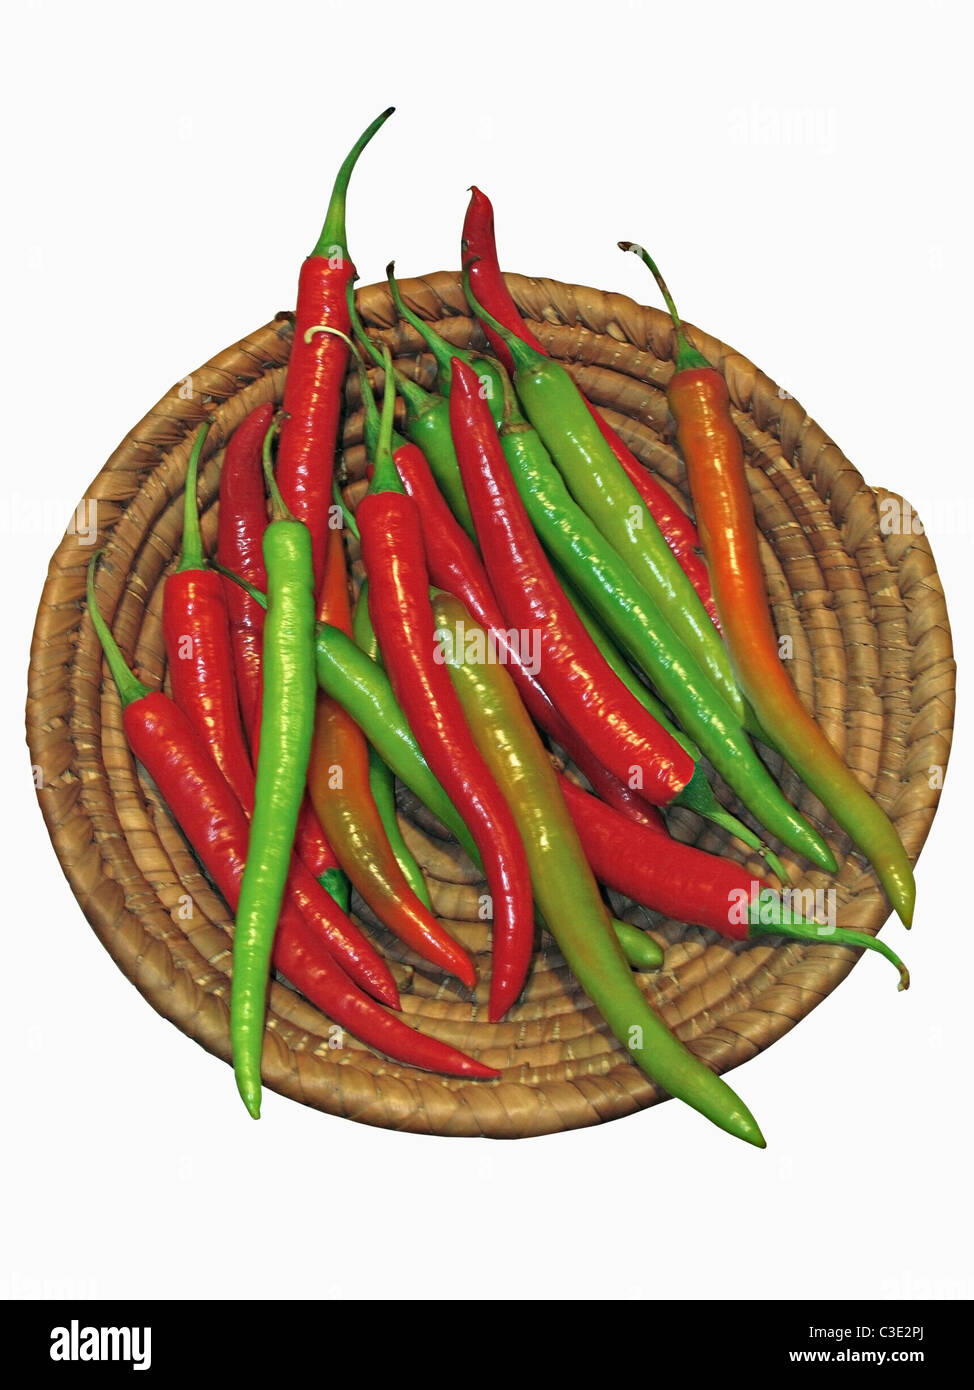 Common Chili, Capsicum annuum, Red and green chilies are together in a basket Stock Photo